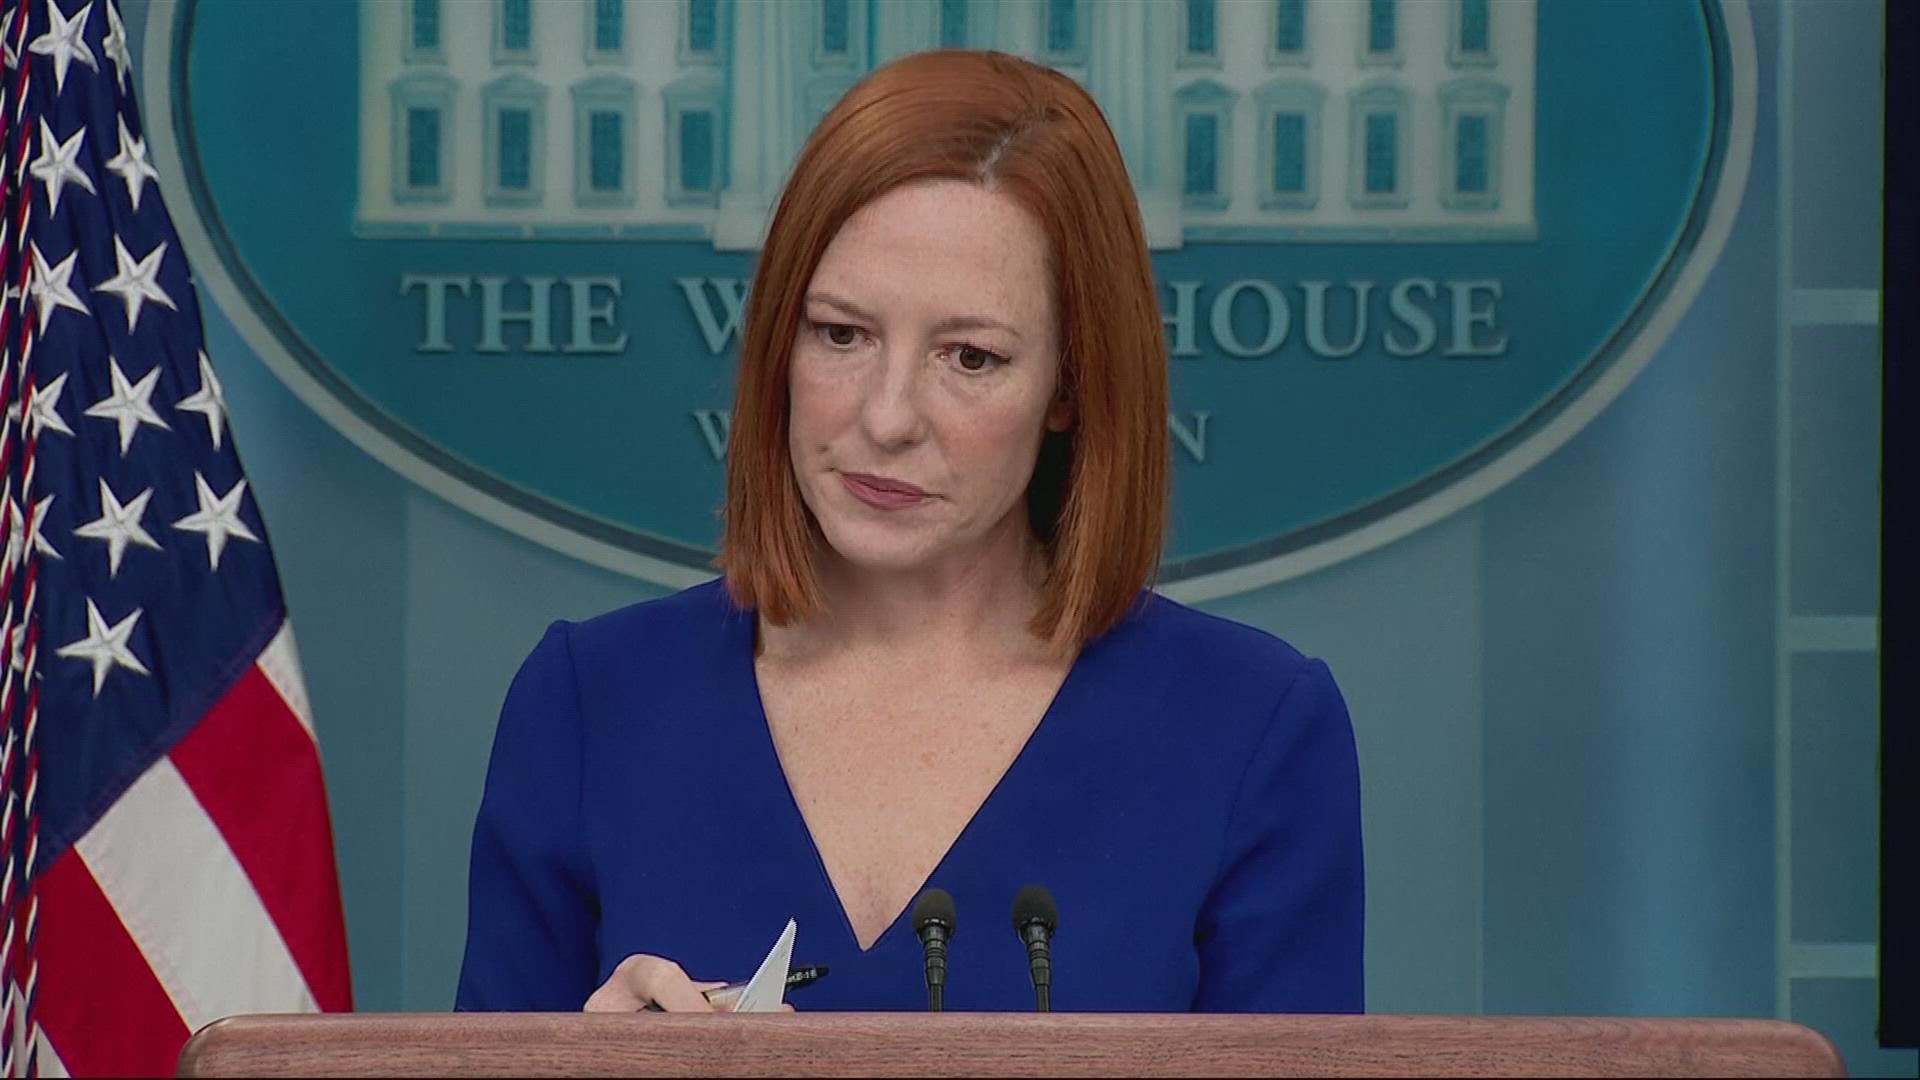 Press Secretary Jen Psaki would not confirm or deny reports that she leaving the White House for a position with a major network cable news channel.